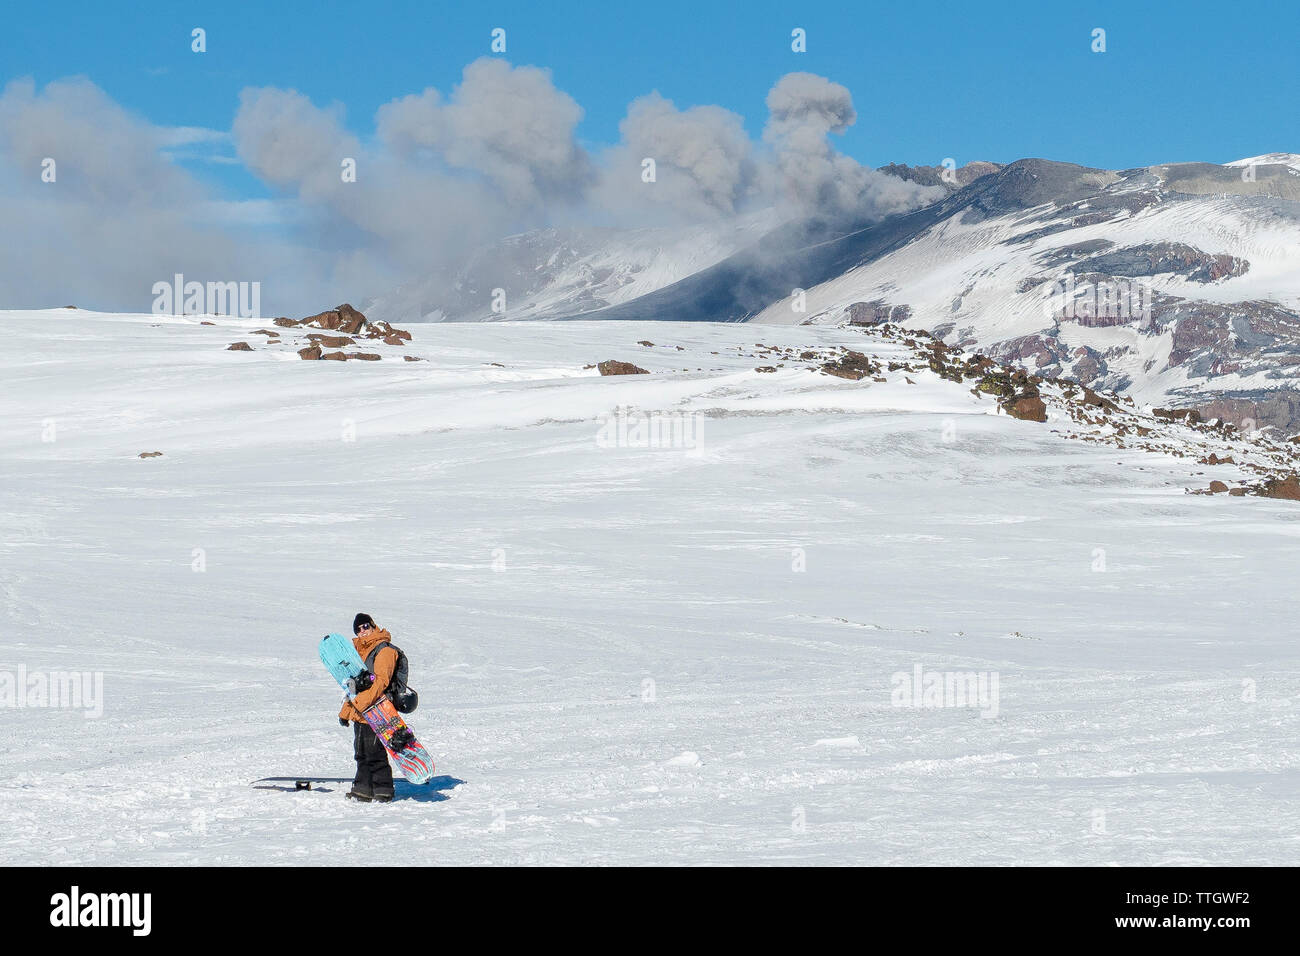 A women stands with her splitboard, as Volcan Copahue spews ash behind Stock Photo